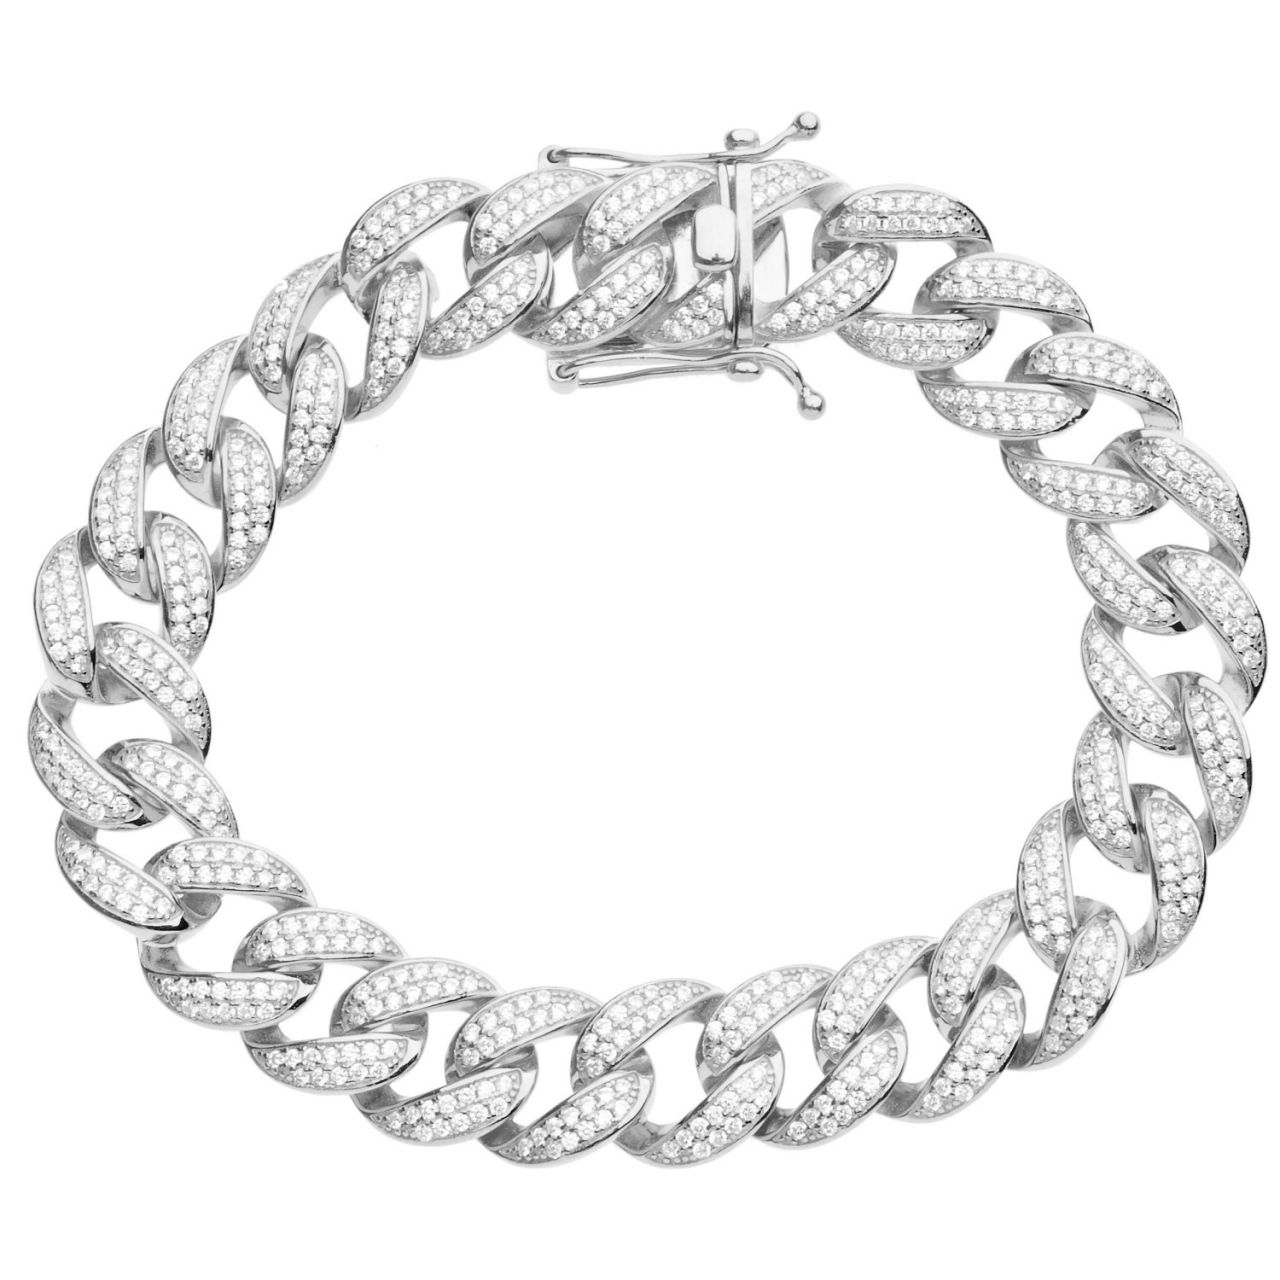 Premium Bling 925 Sterling Silber Armband – MIAMI CURB 14mm